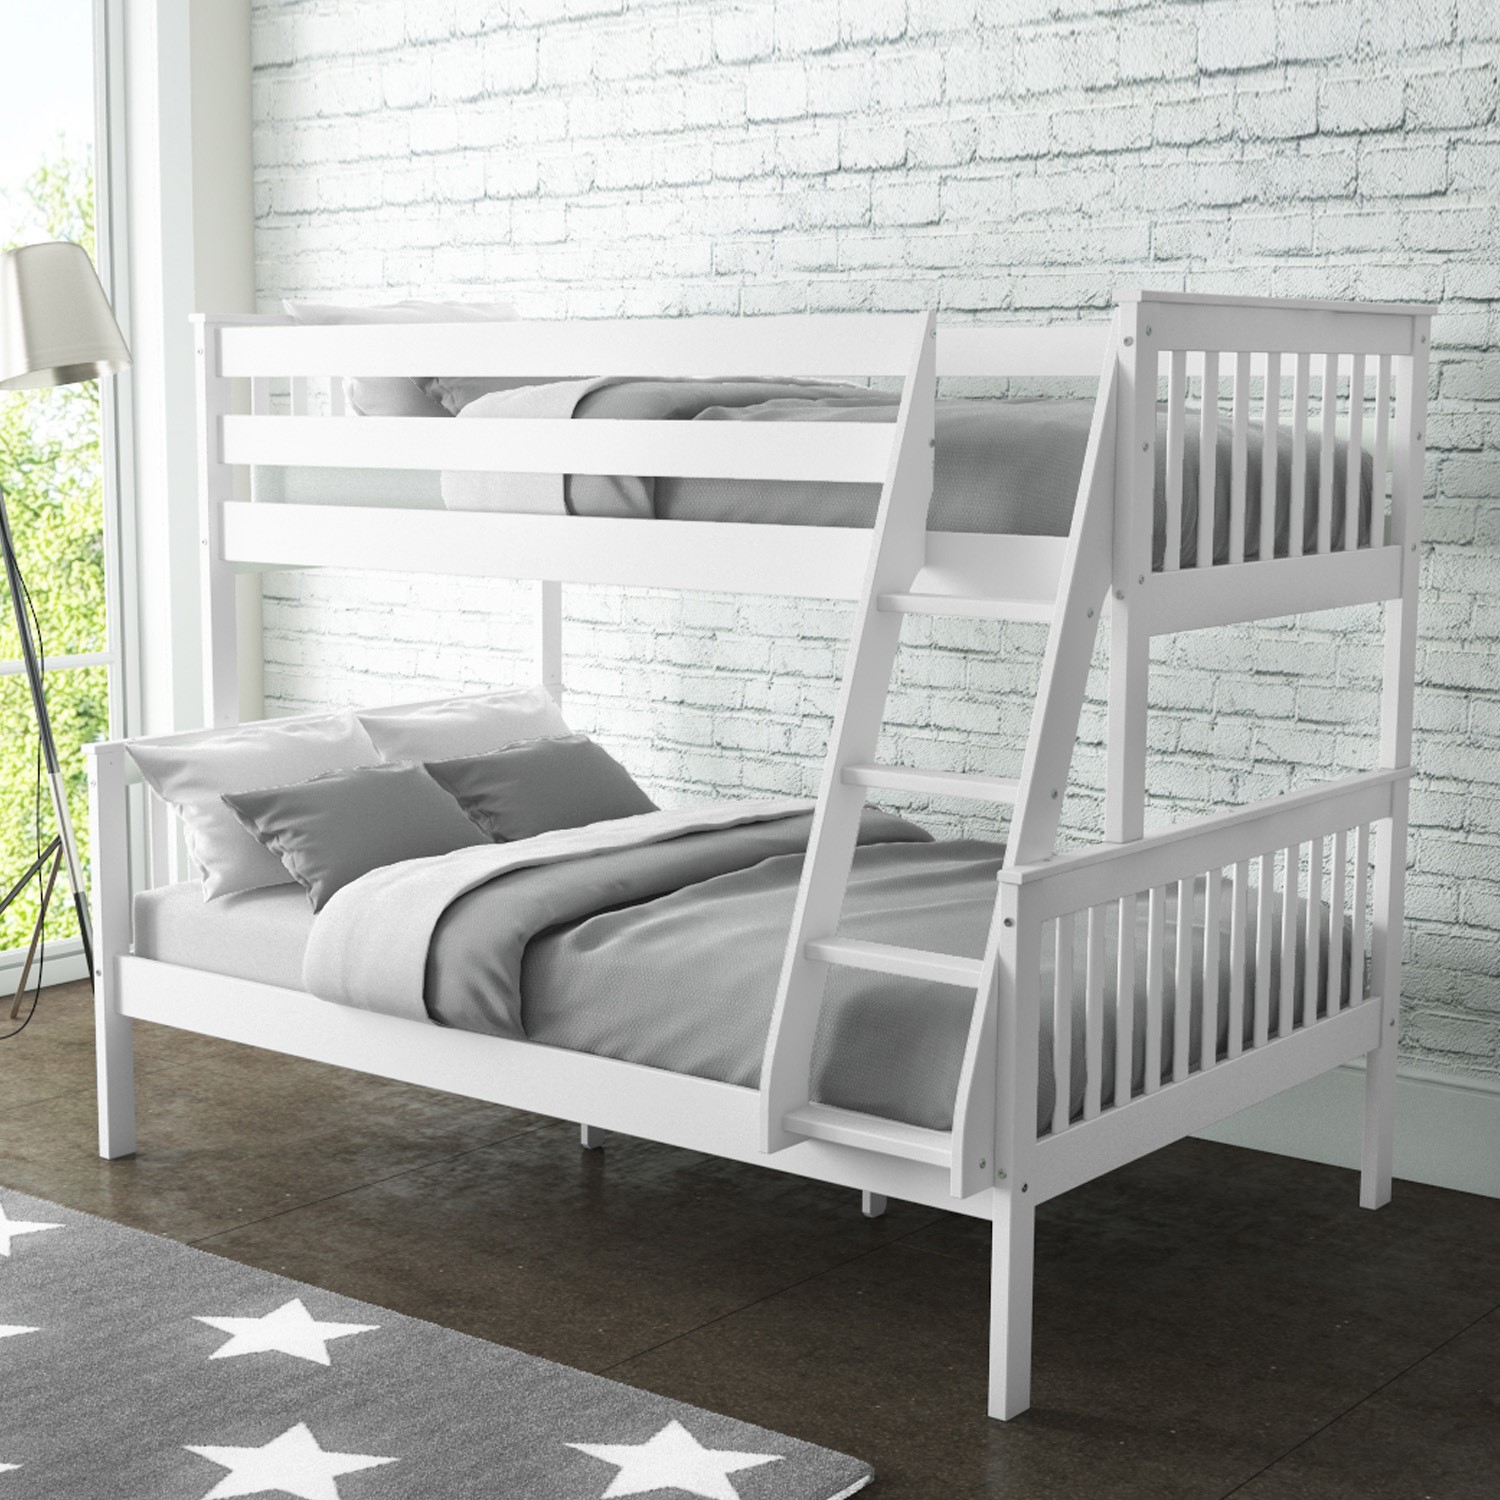 Oxford Triple Bunk Bed In White Small, Bunk Beds With Double Bed On Bottom Uk